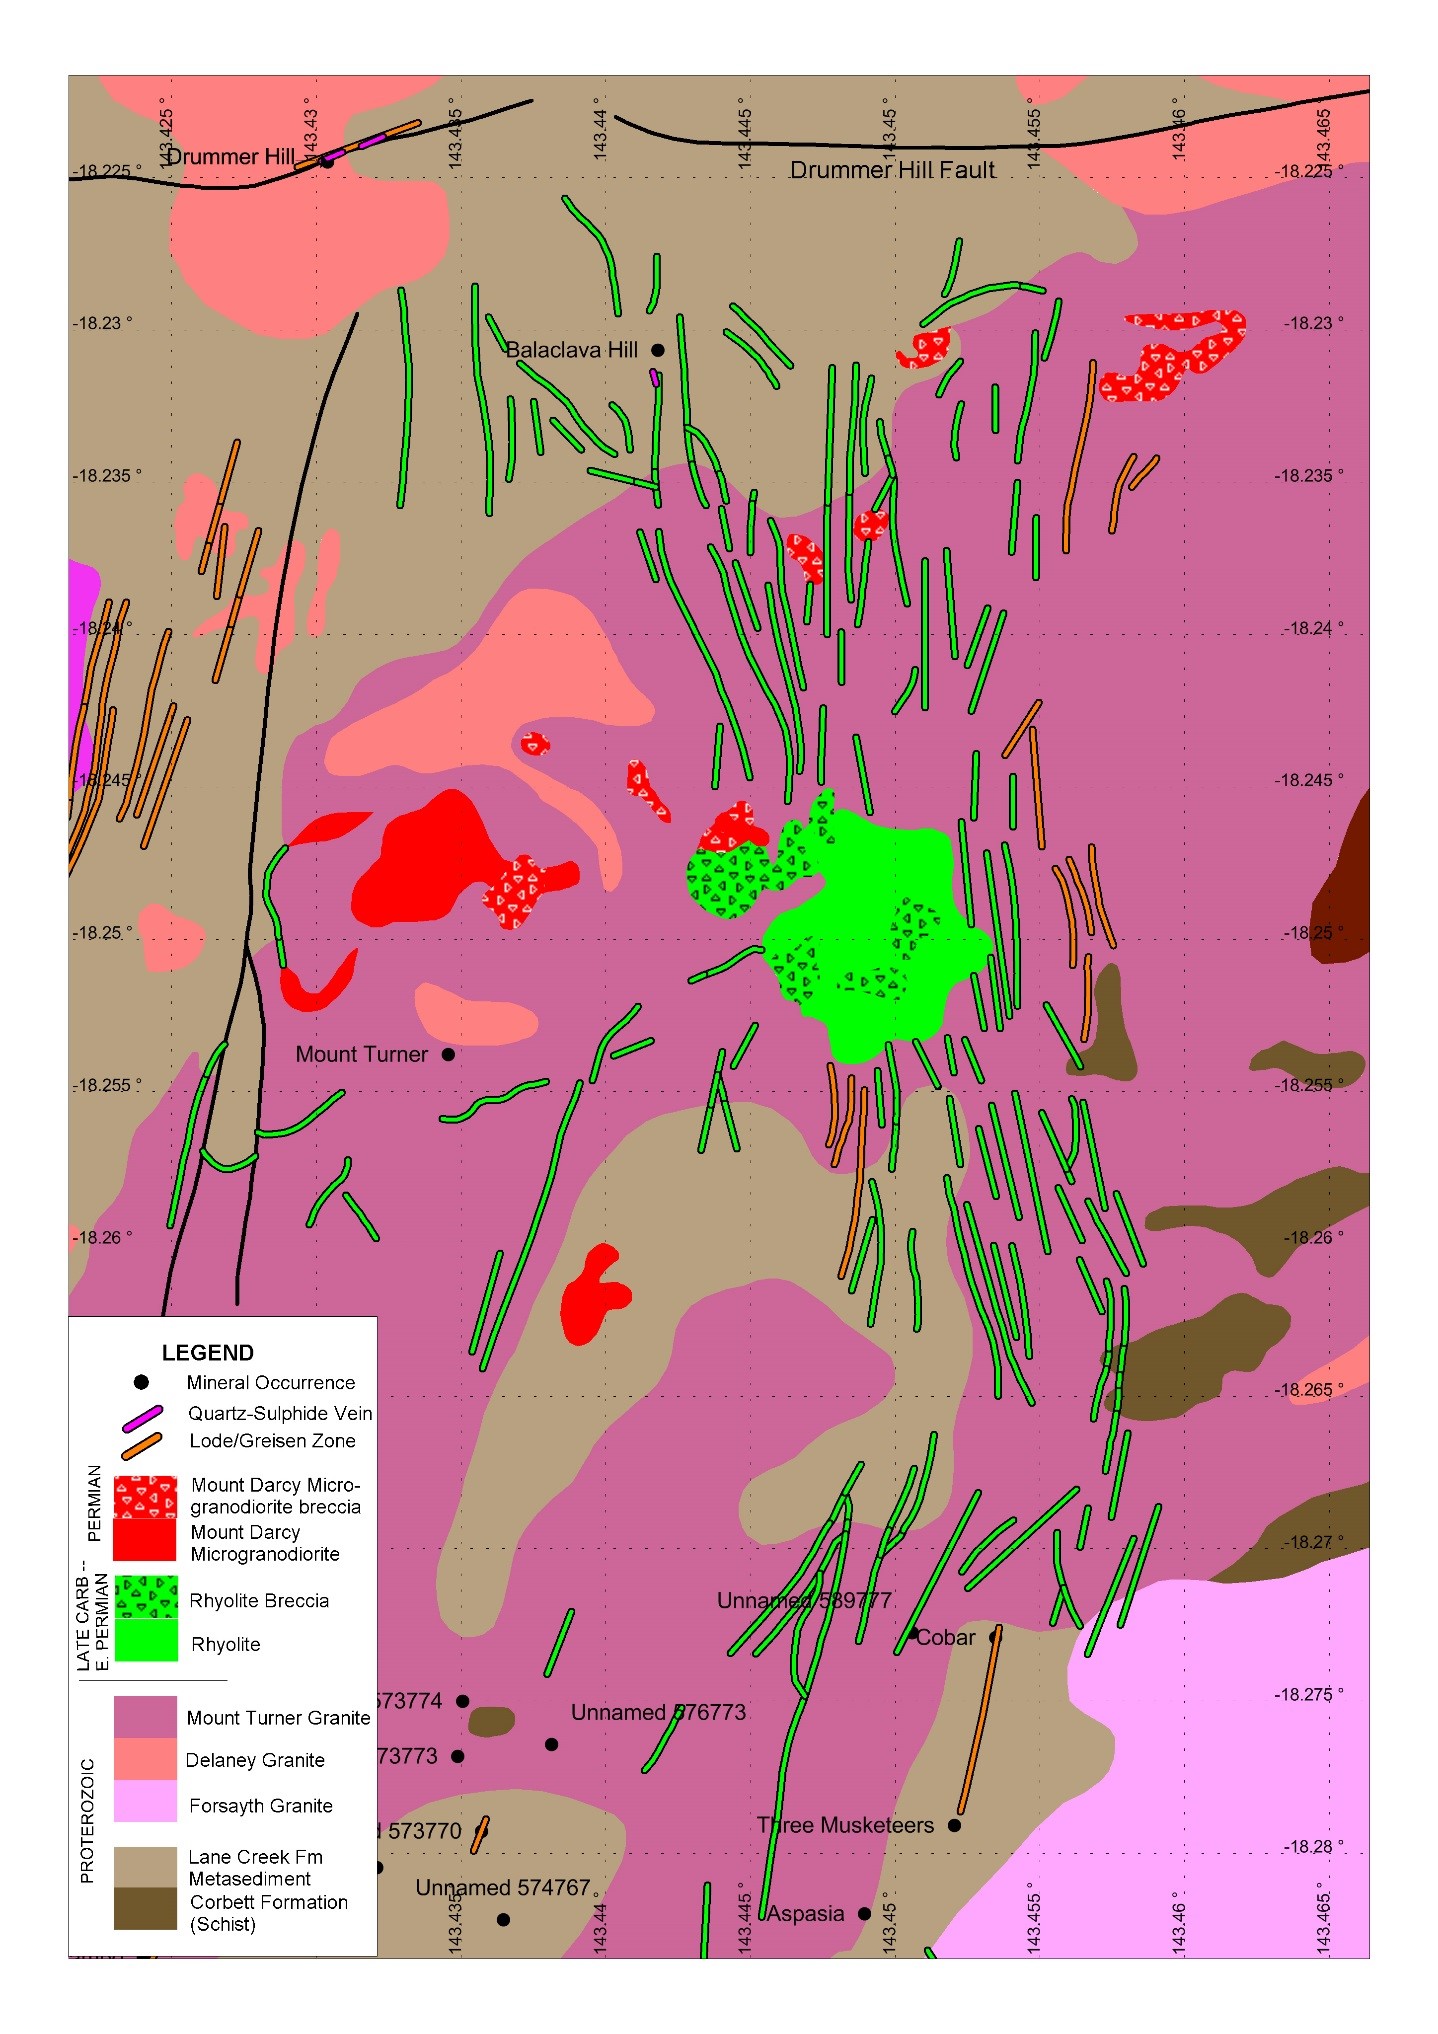 Figure 23 : Mount Turner geology map showing relationship of Permo-Carboniferous intrusives, breccia bodies, related dykes swarms and structurally controlled greisen zones.